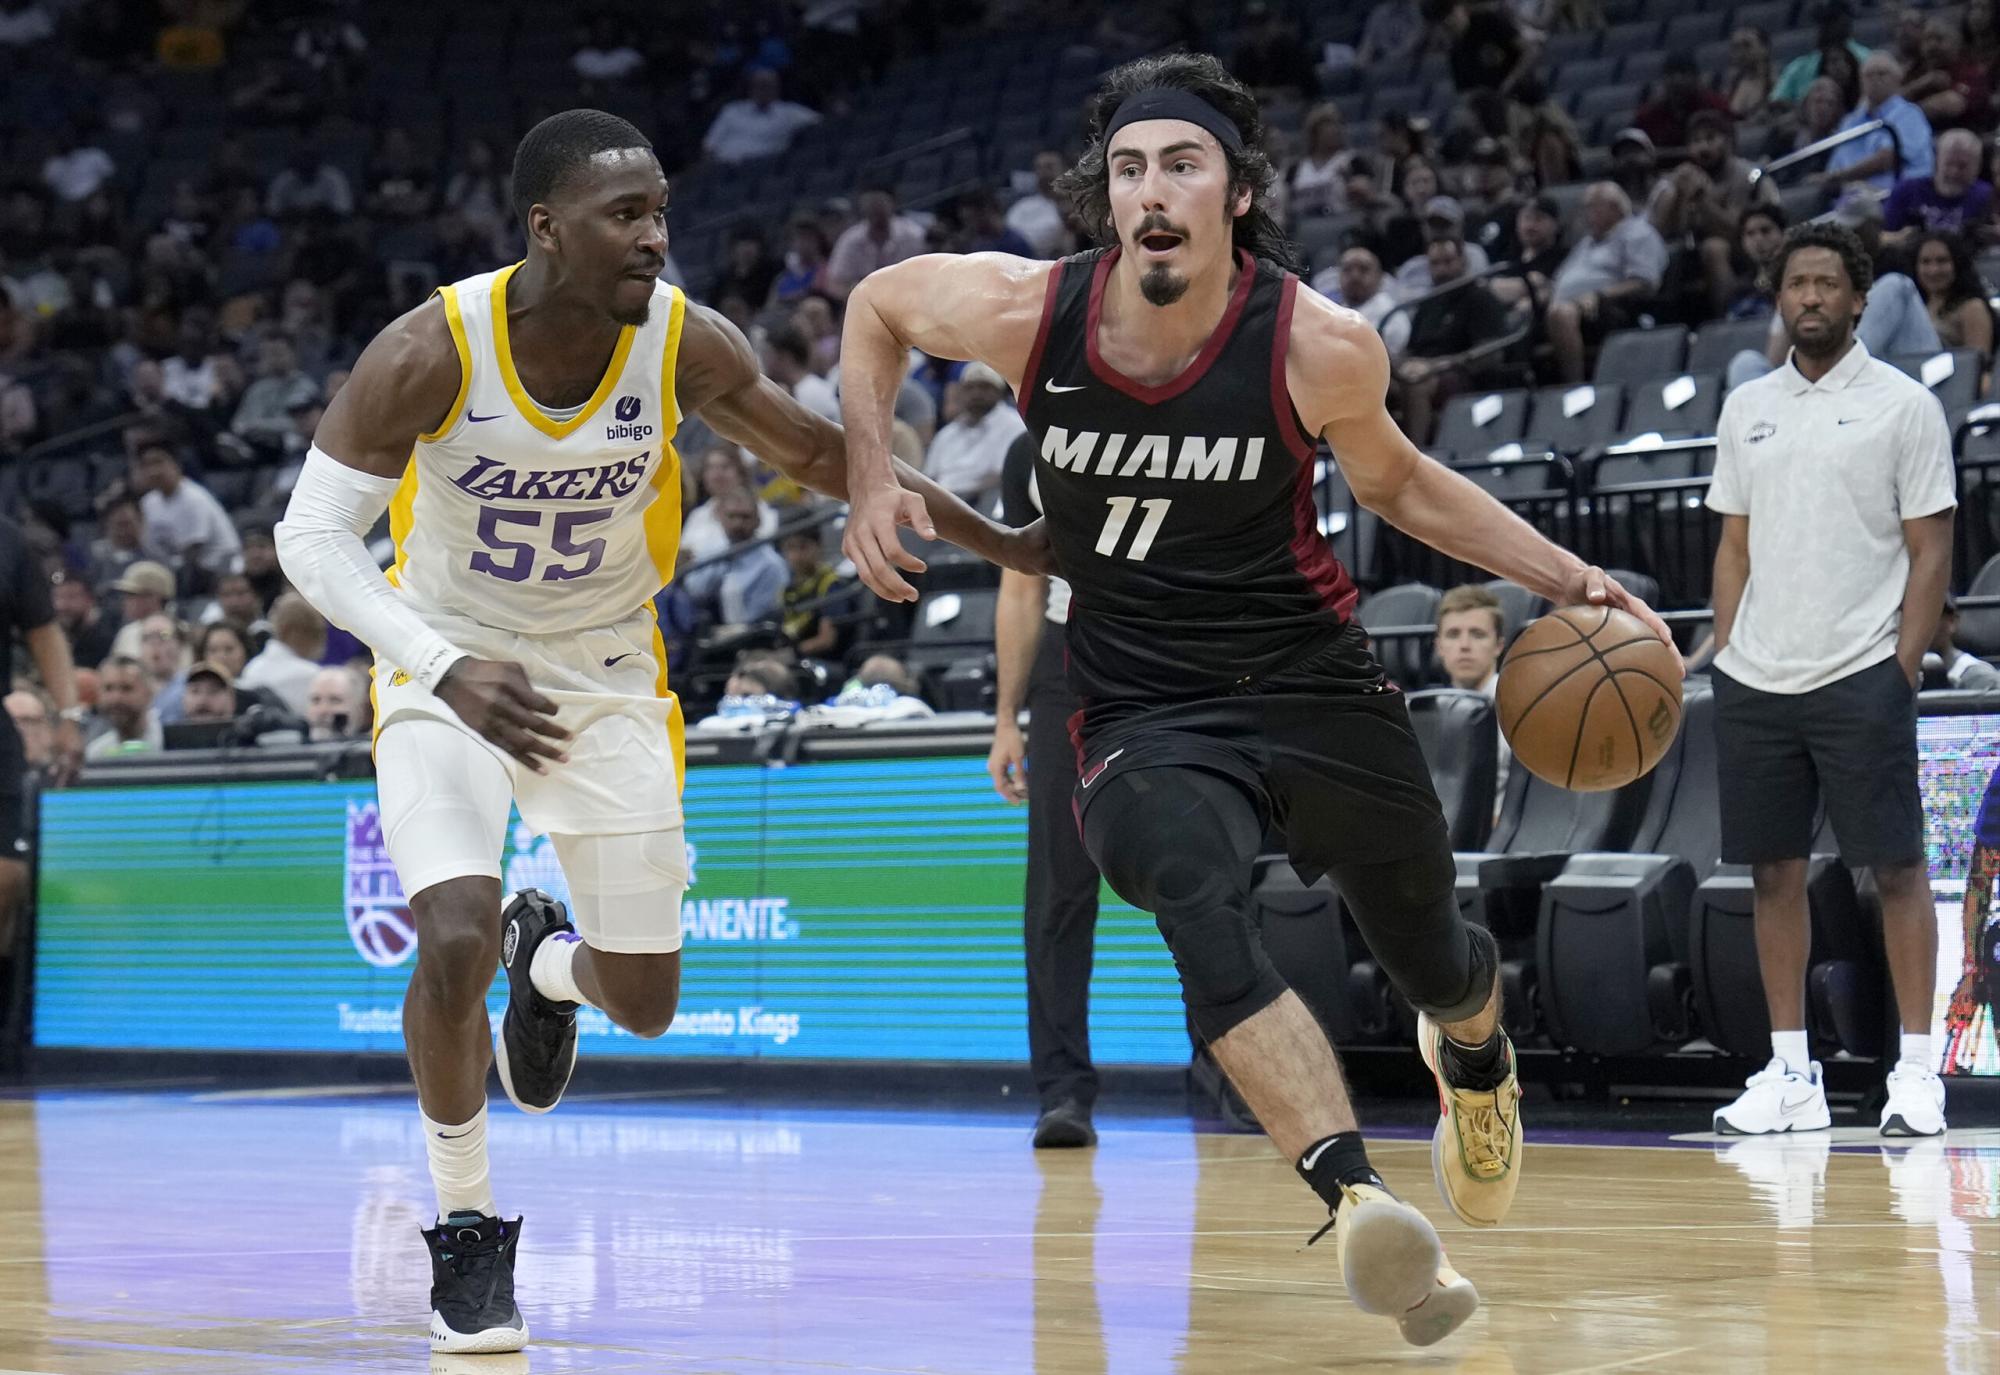 $!Jaime Jaquez Jr. has already been playing in the NBA during the Heat's preseason.